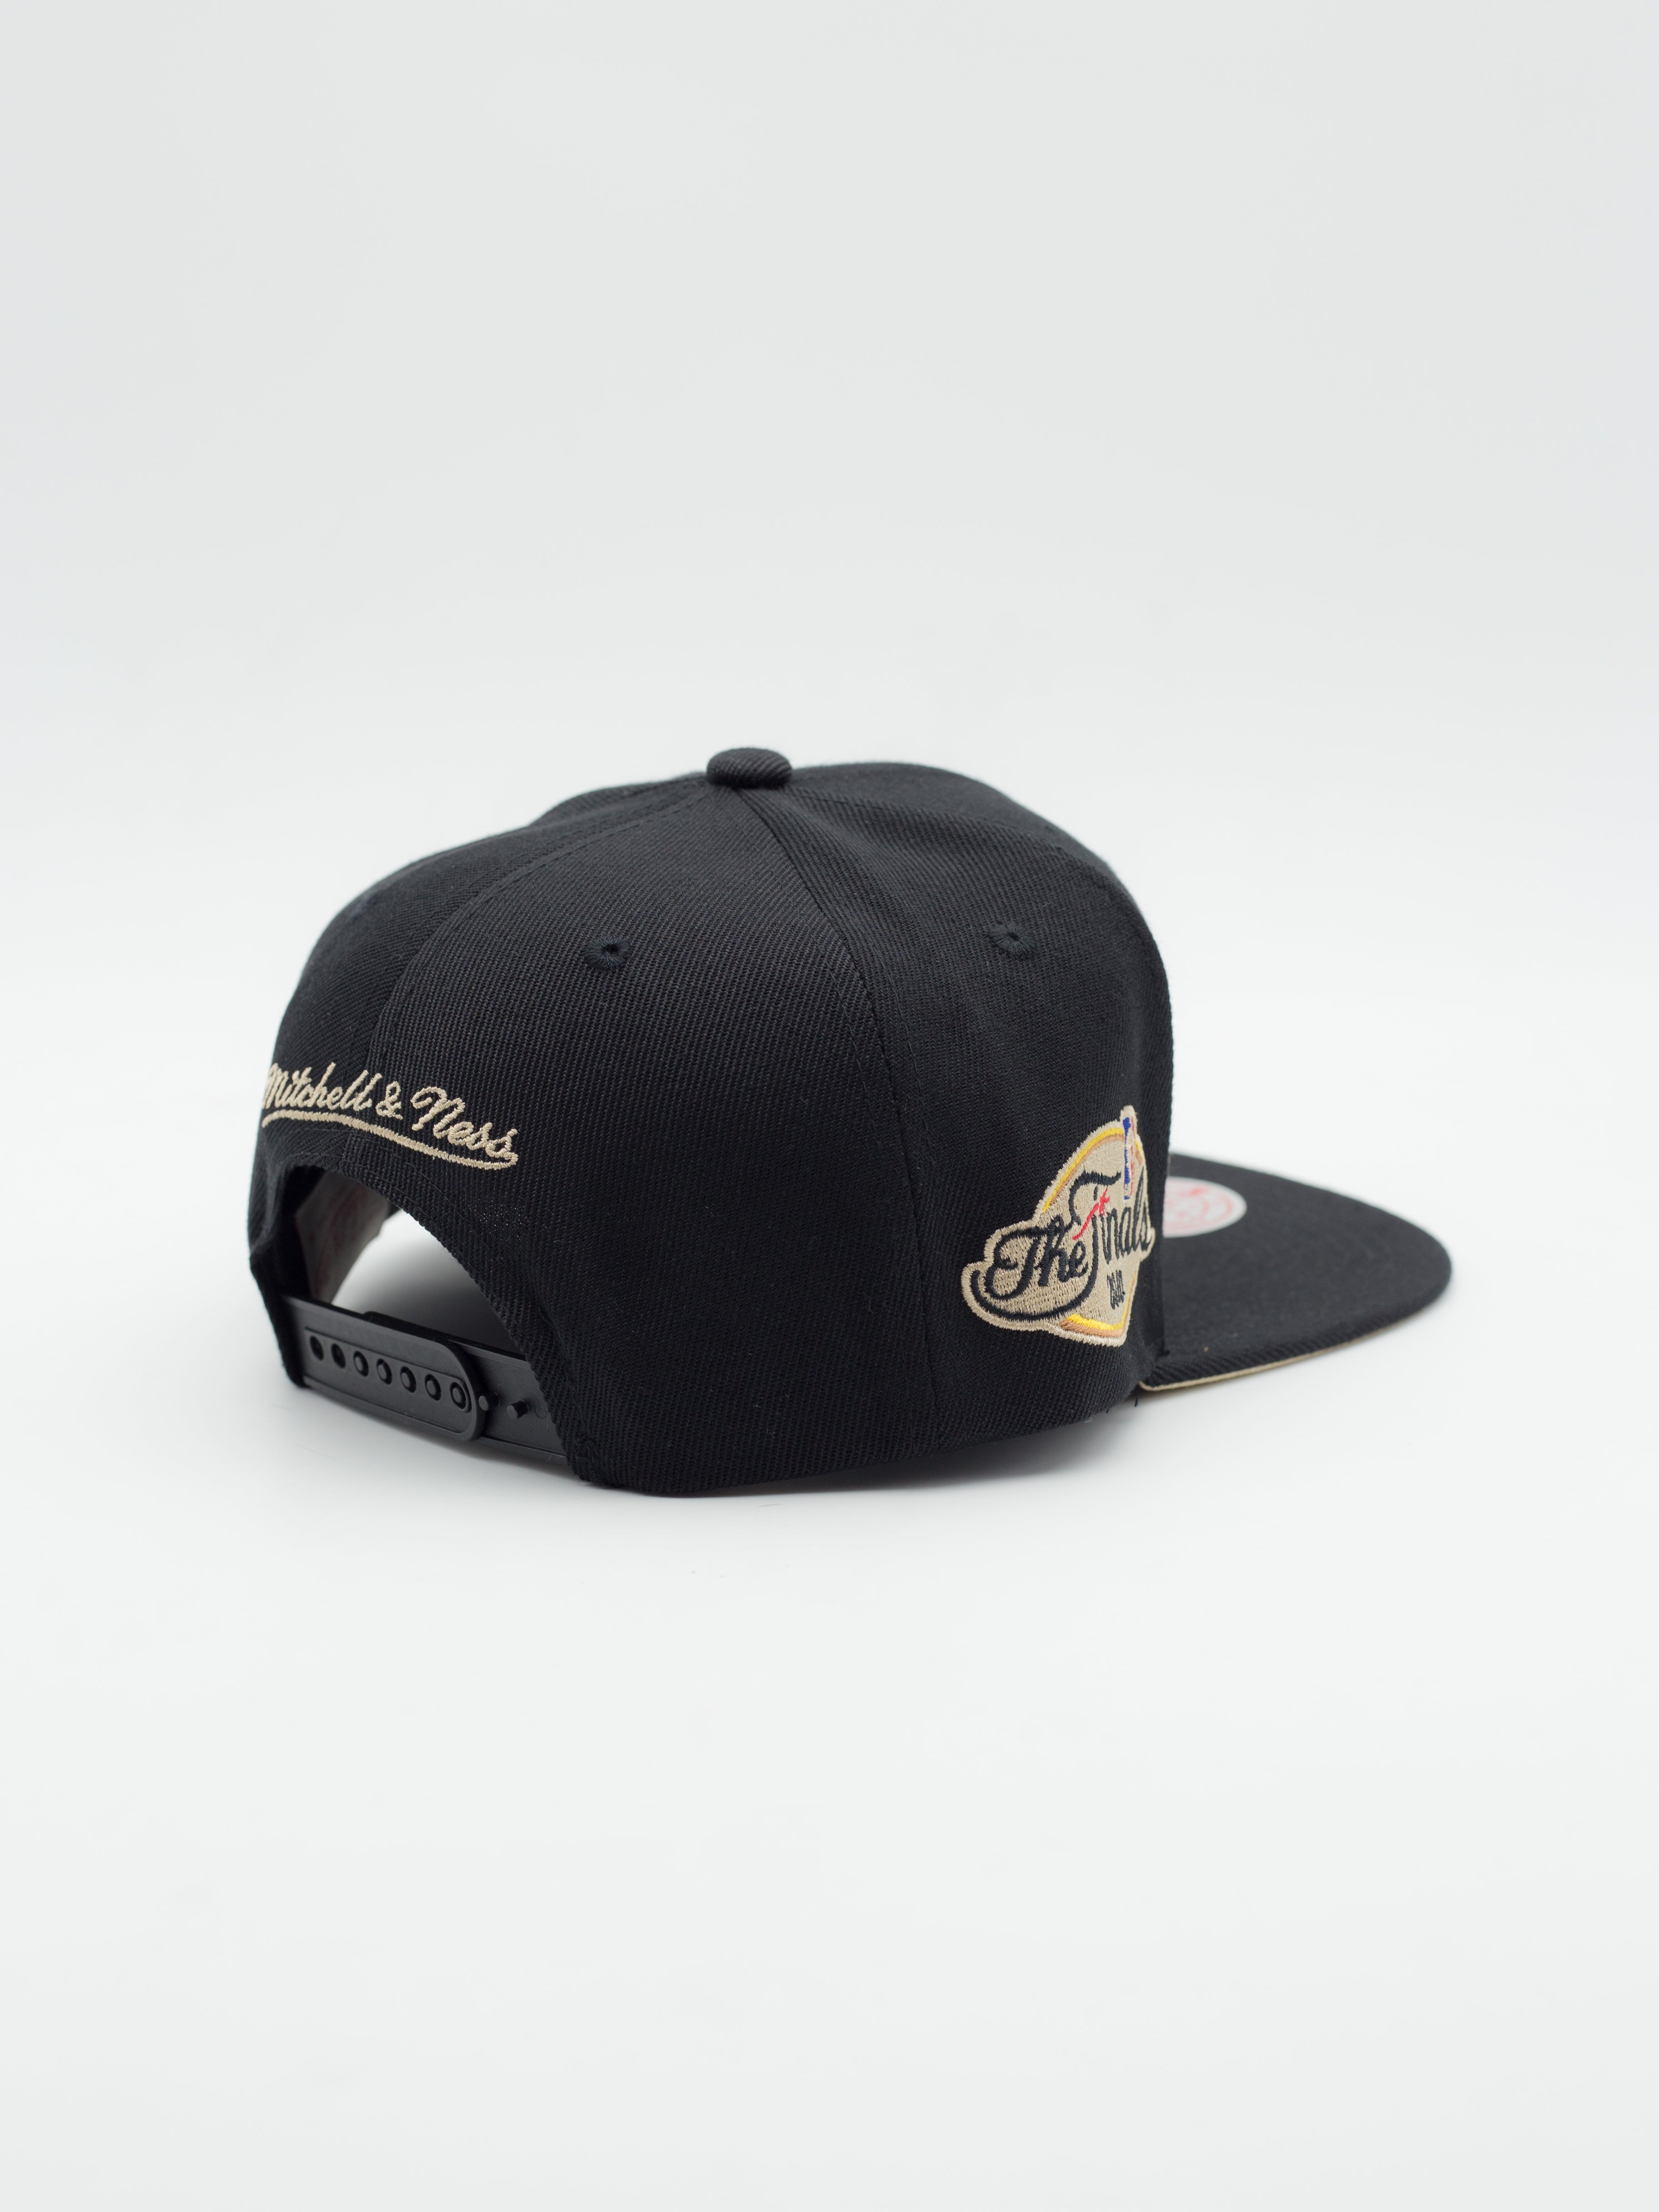 With Love Los Angeles Lakers Snapback